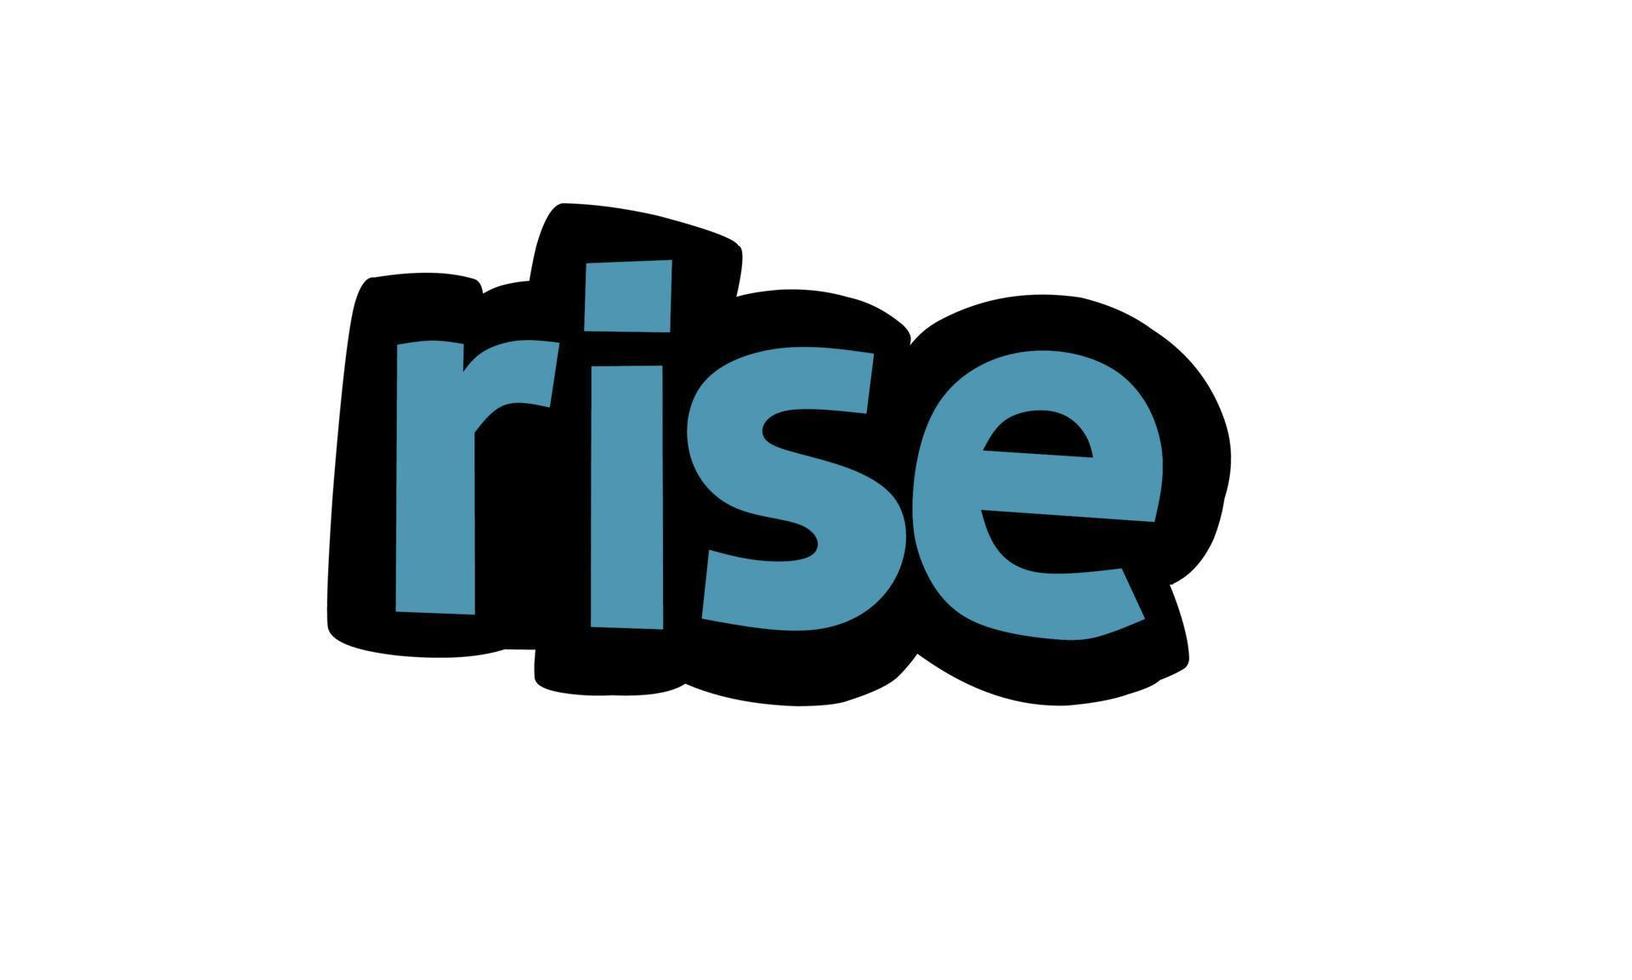 RISE writing design vector on white background